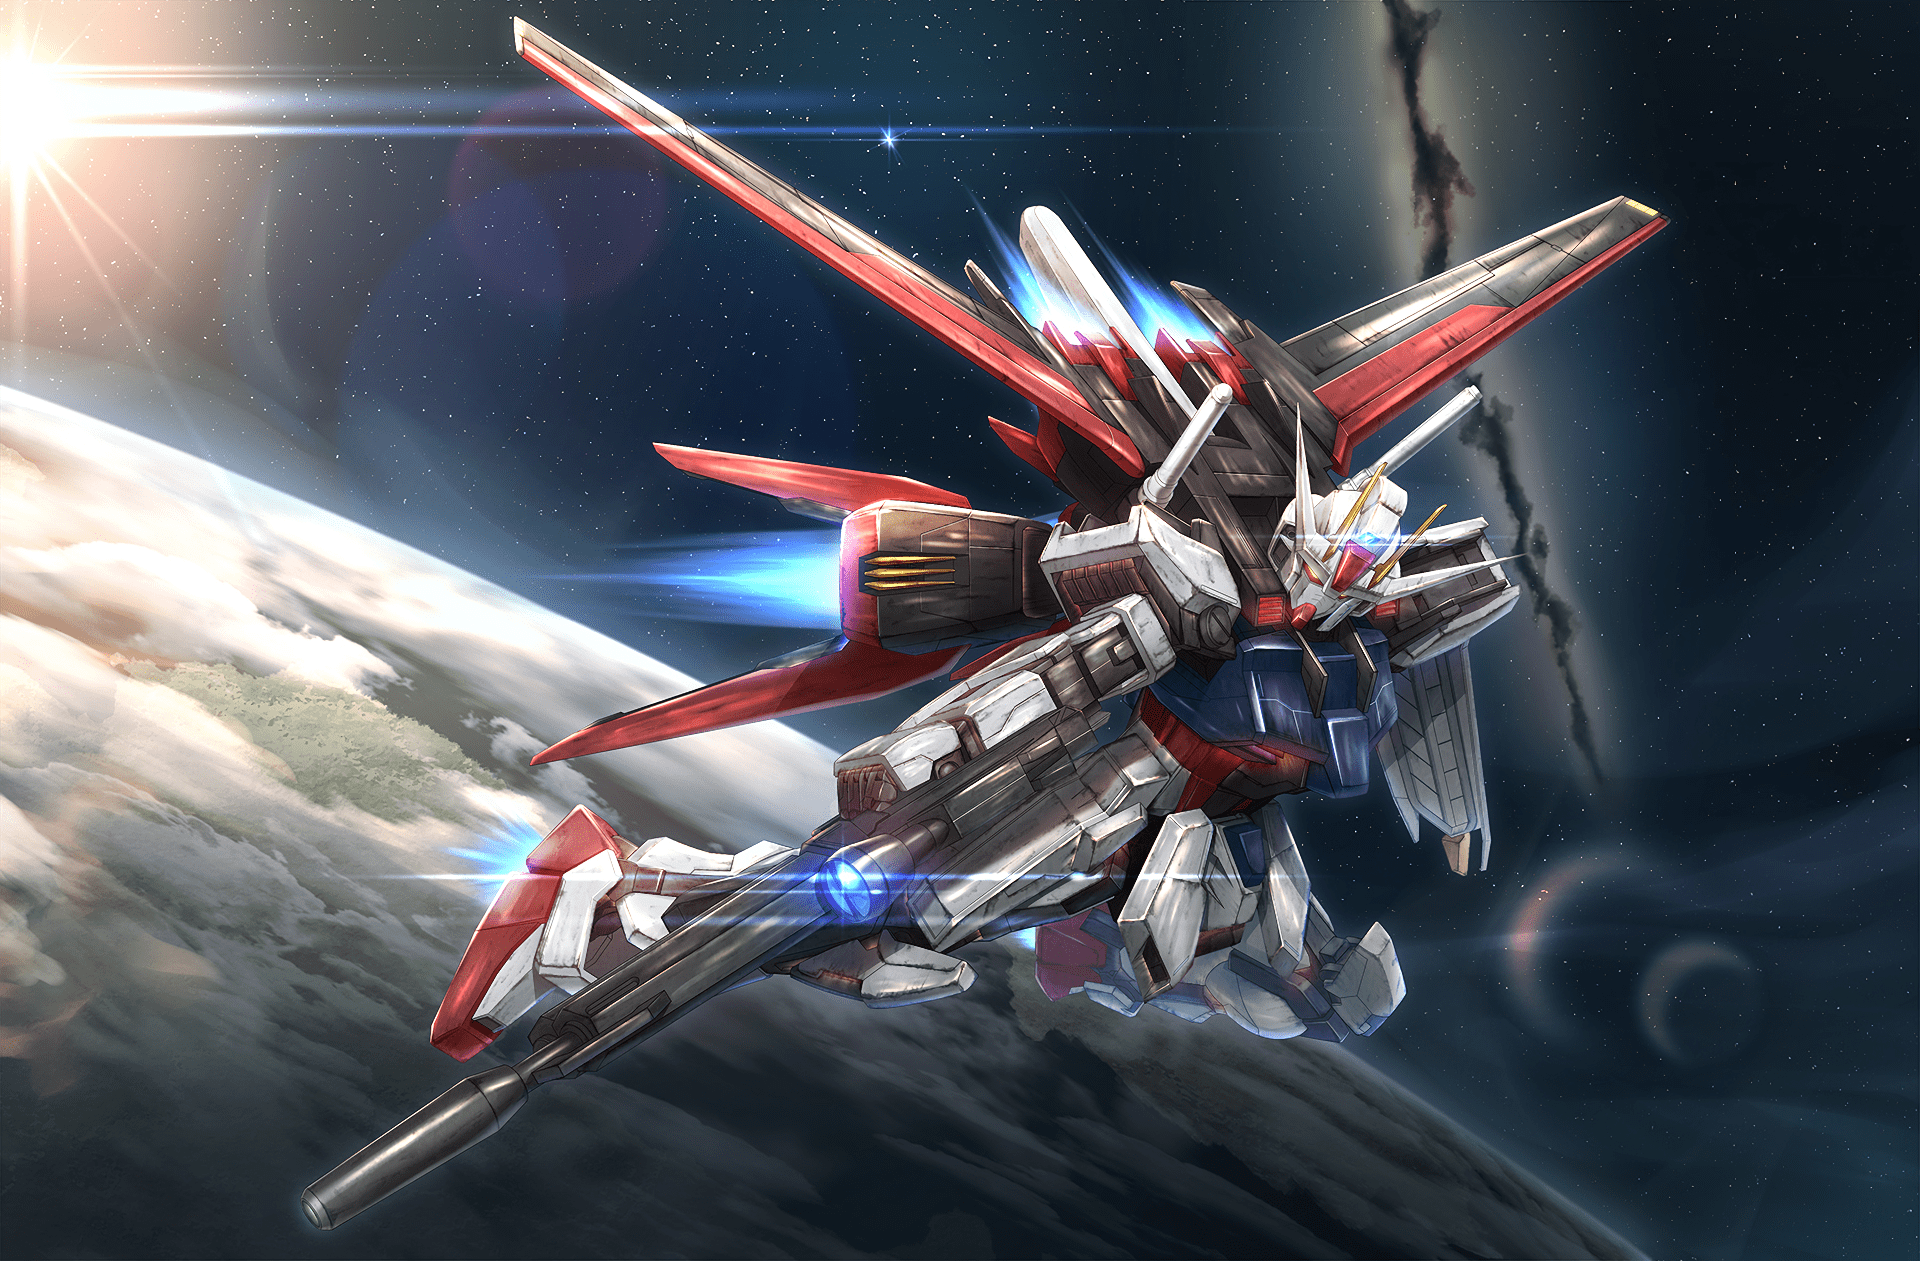 Mobile Suit Gundam Wallpapers - Top Free Mobile Suit Gundam Backgrounds ...